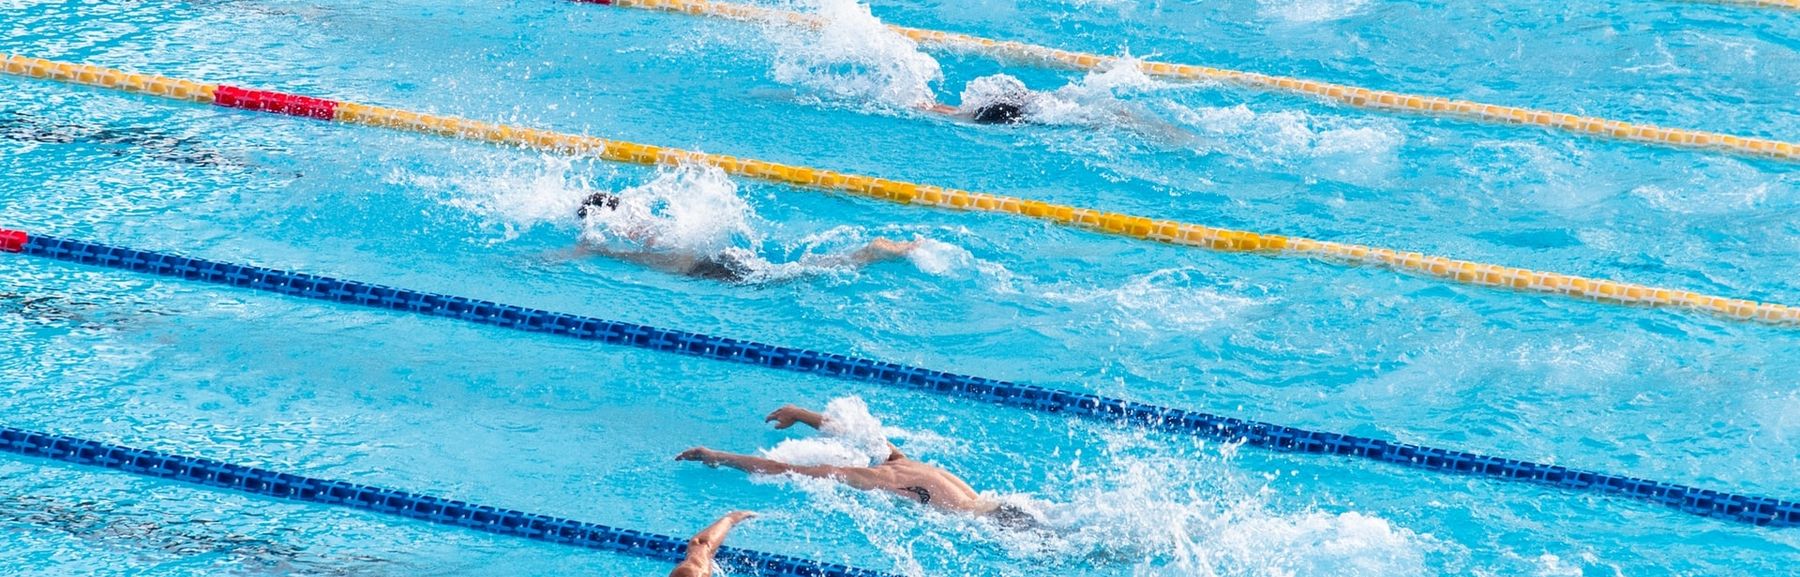 Developing a strategy for Swim England to get more people swimming